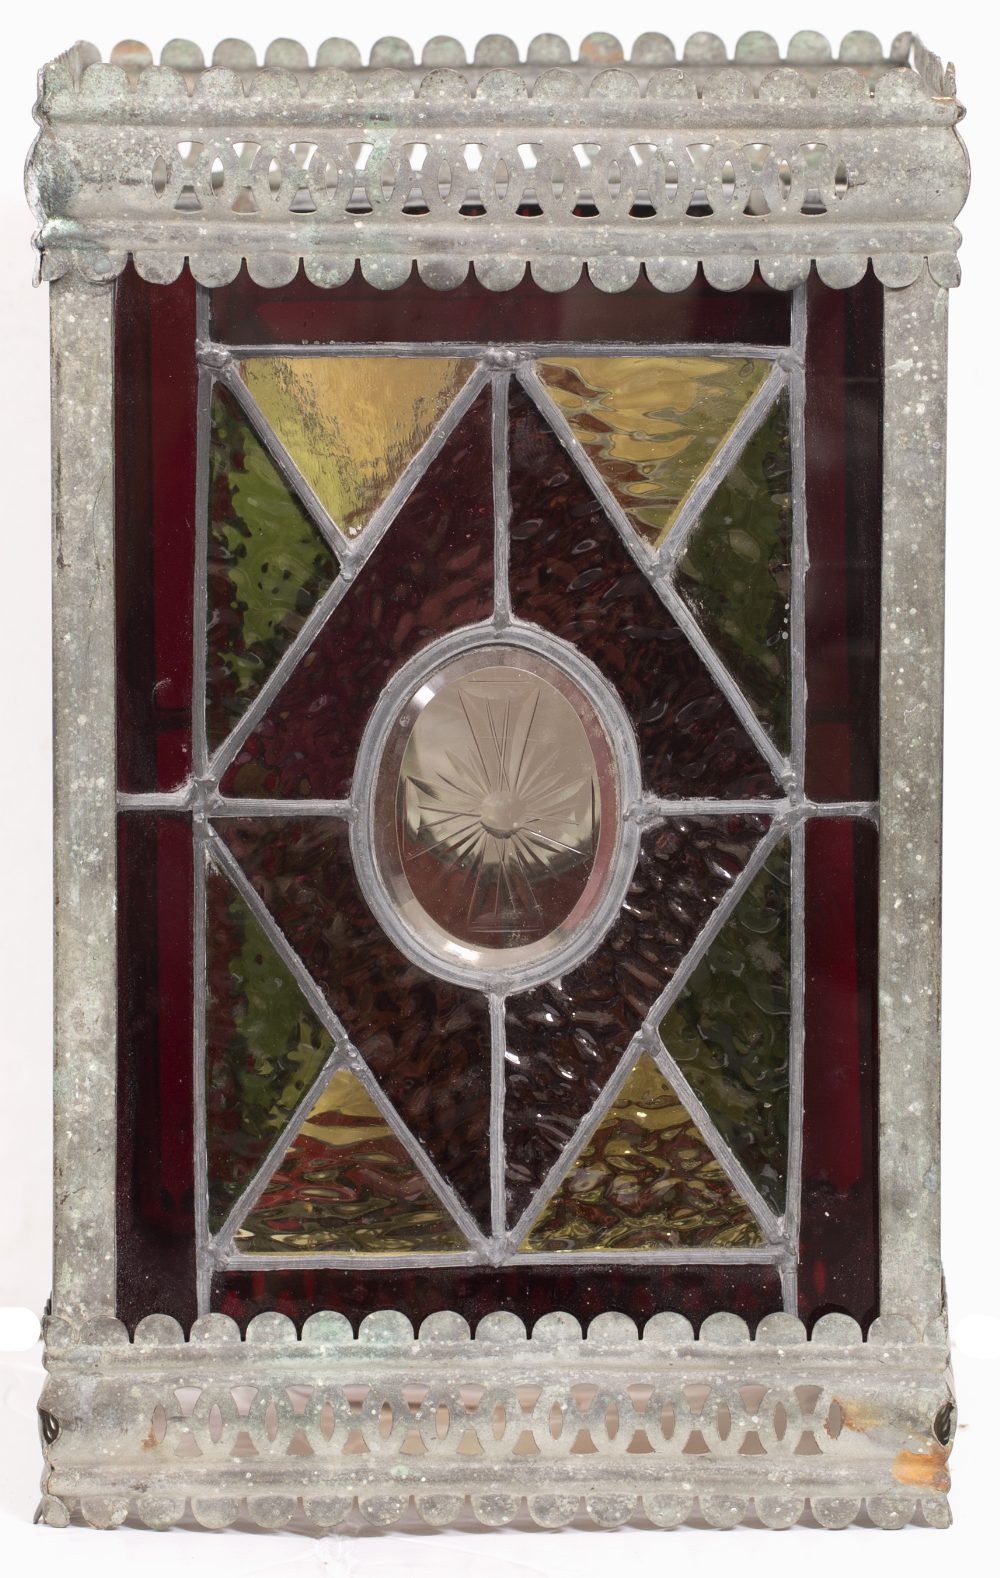 A VICTORIAN LEADED LIGHT SQUARE SECTION BRASS HANGING HALL LANTERN with engraved oval central panels - Image 2 of 3